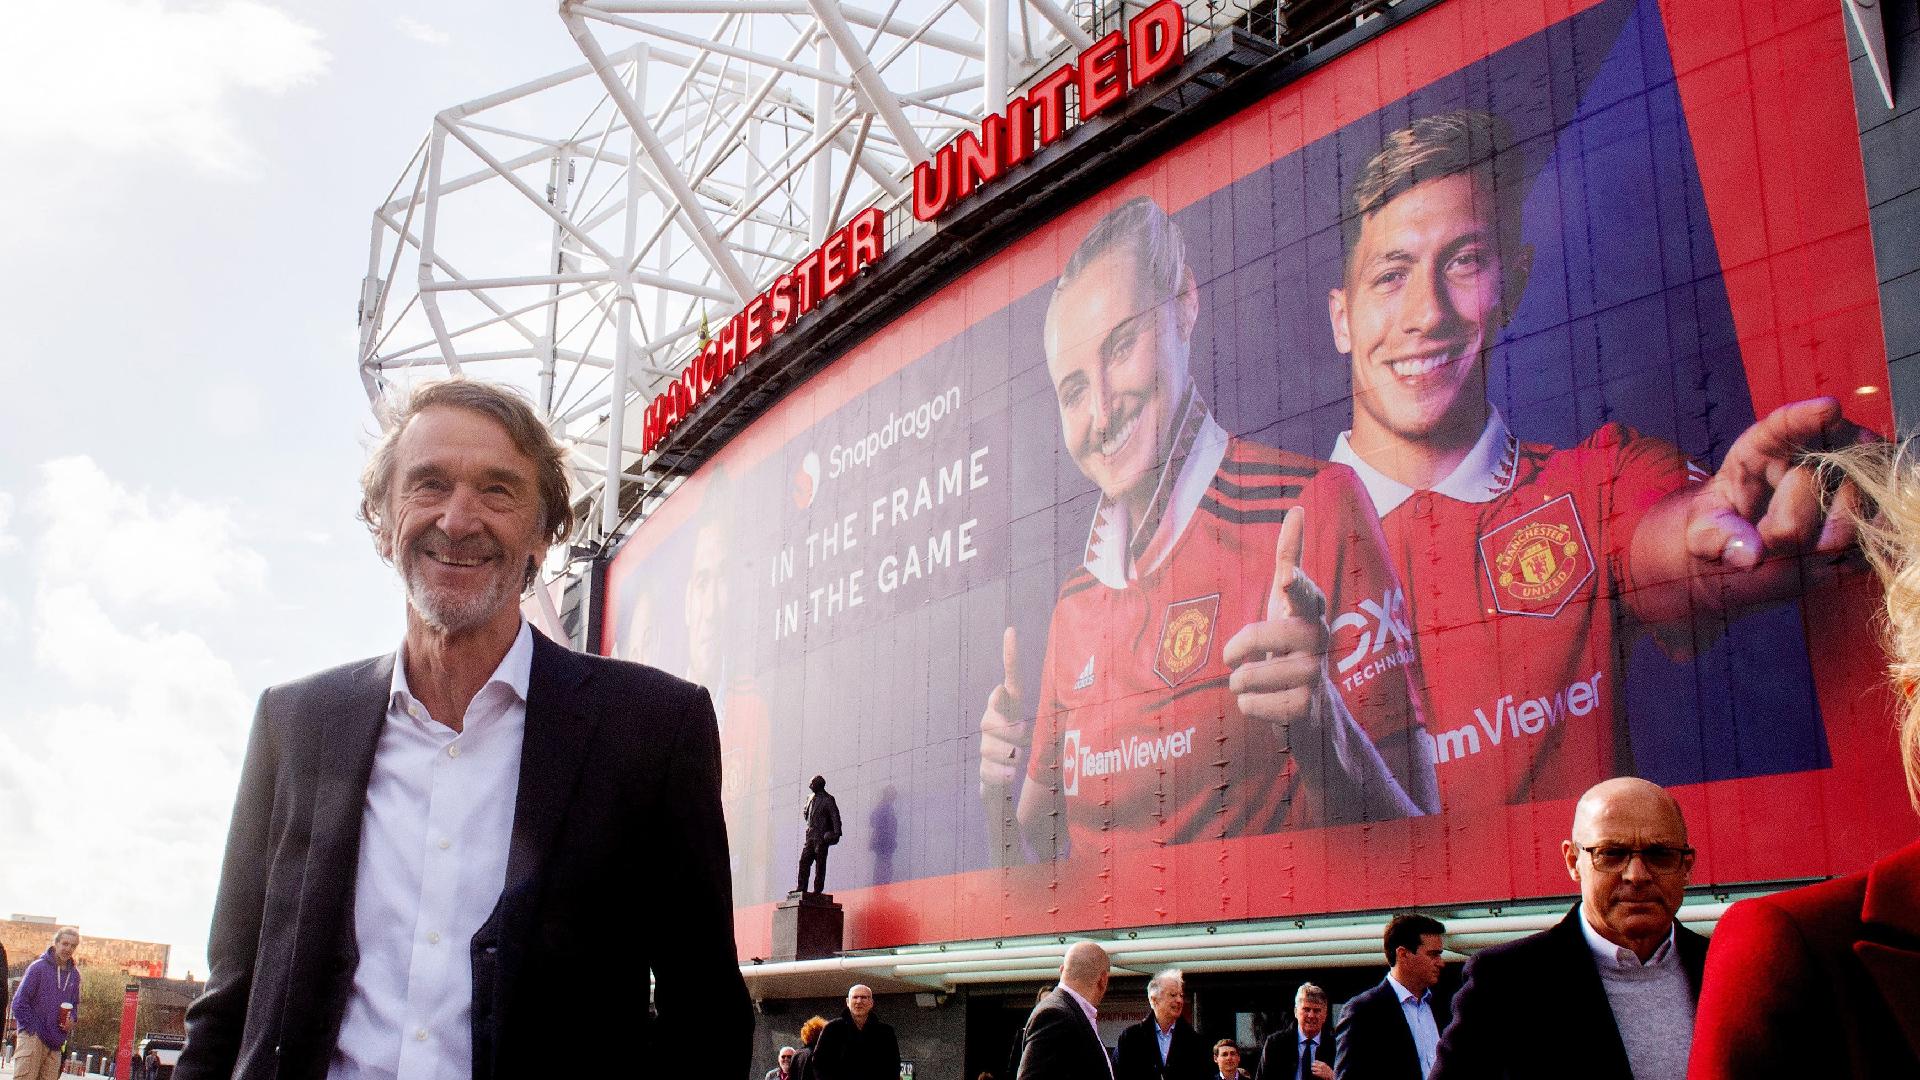 Manchester United announced more changes to its executive structure on Tuesday as the new era under co-owner Jim Ratcliffe continues